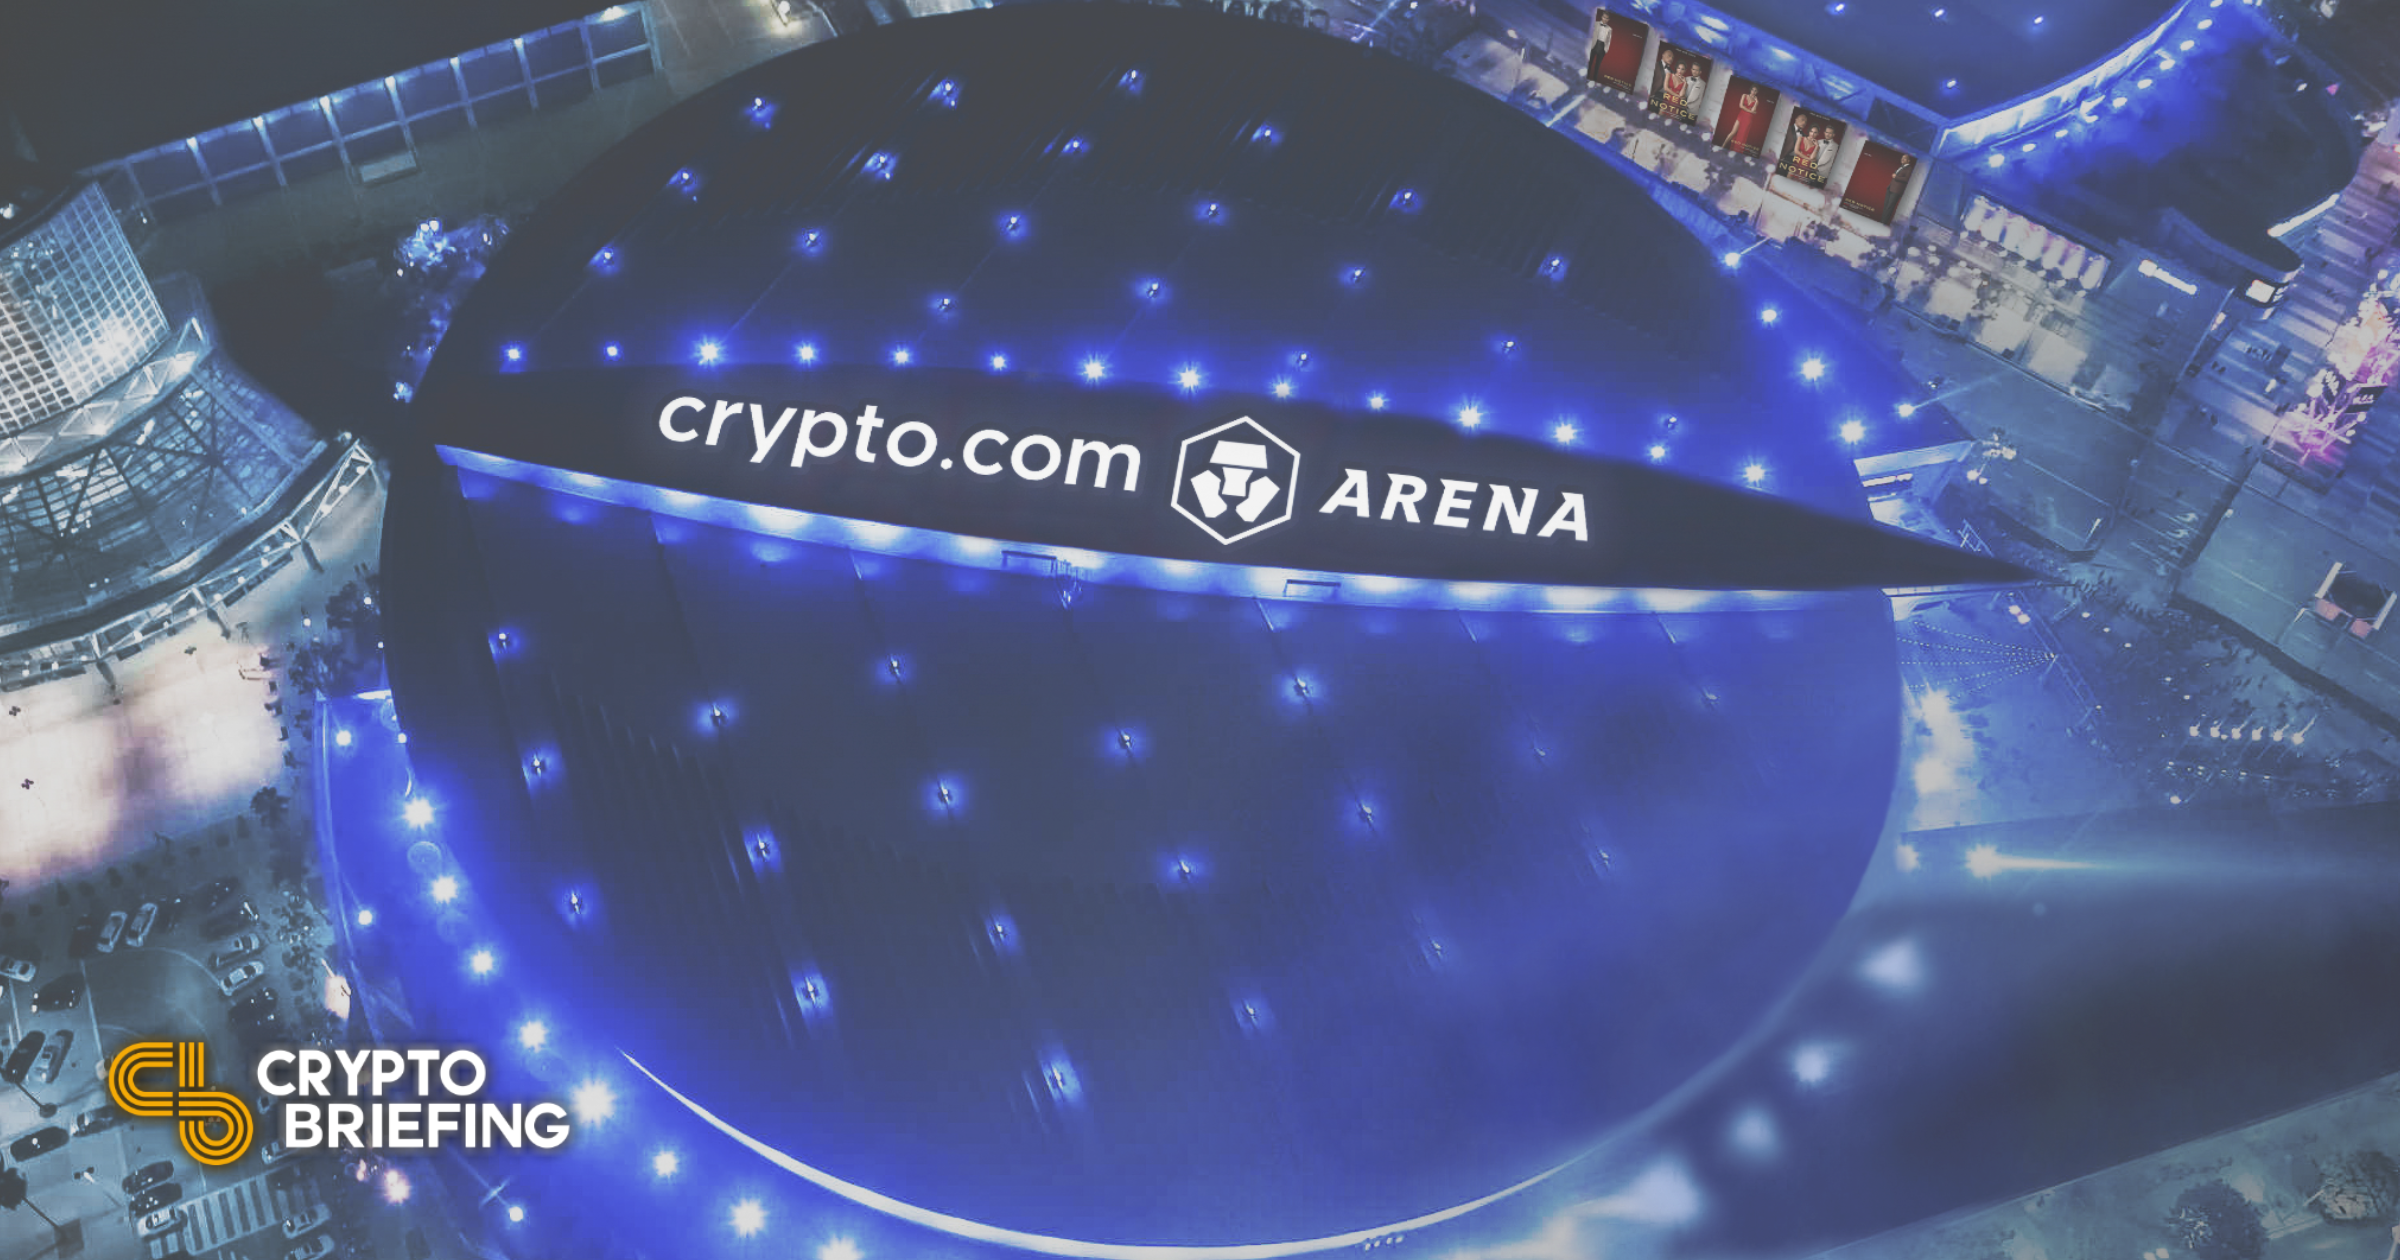 Lakers news: Crypto.com CMO on arena still being called Staples Center